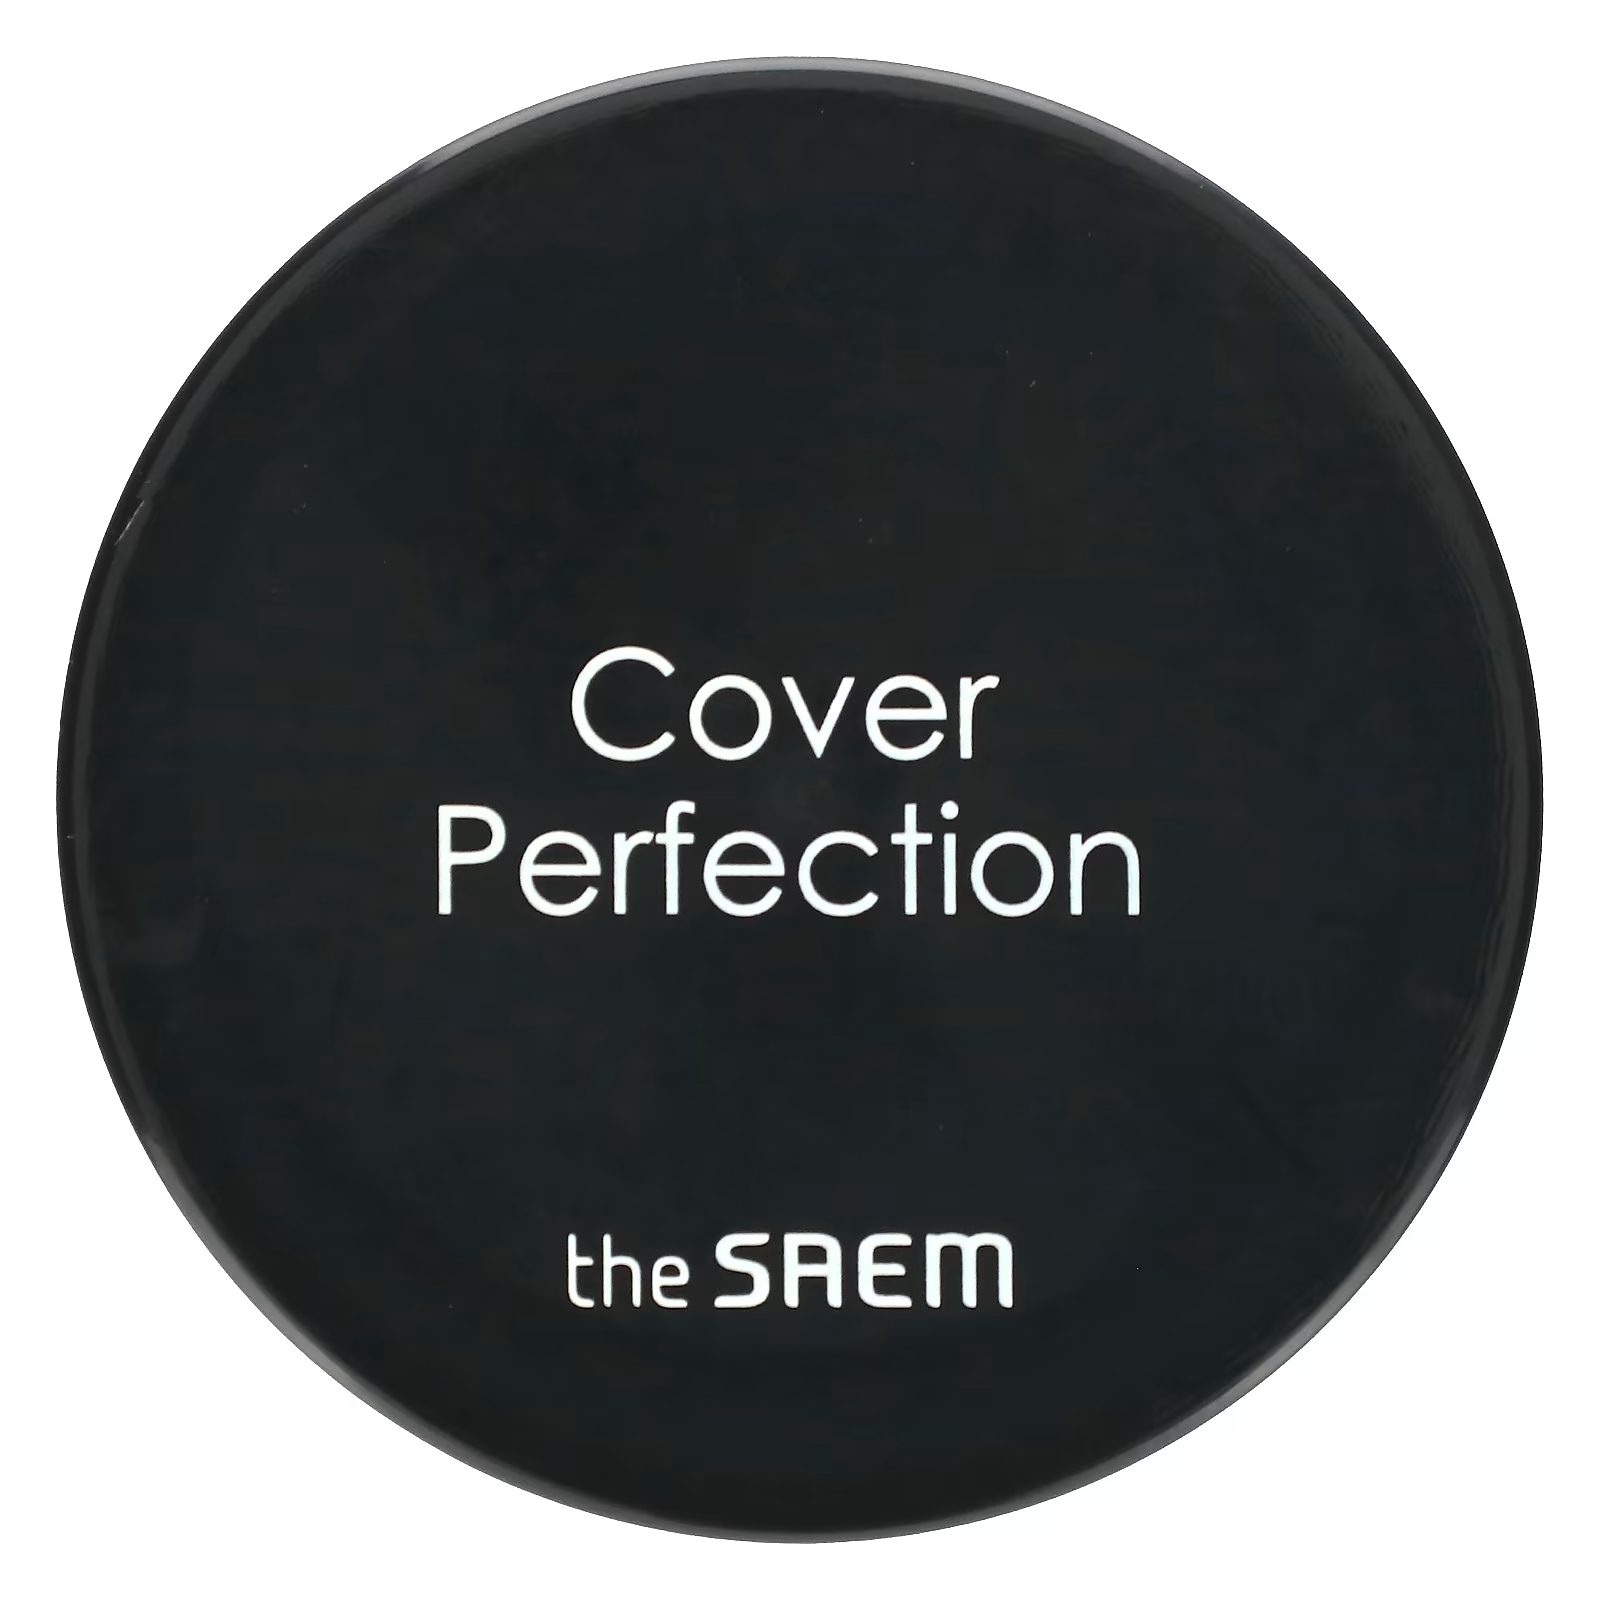 Бальзам-консилер The Saem Cover Perfection Pot Concealer 01 Clear Beige бальзам консилер the saem cover perfection pot concealer 01 clear beige